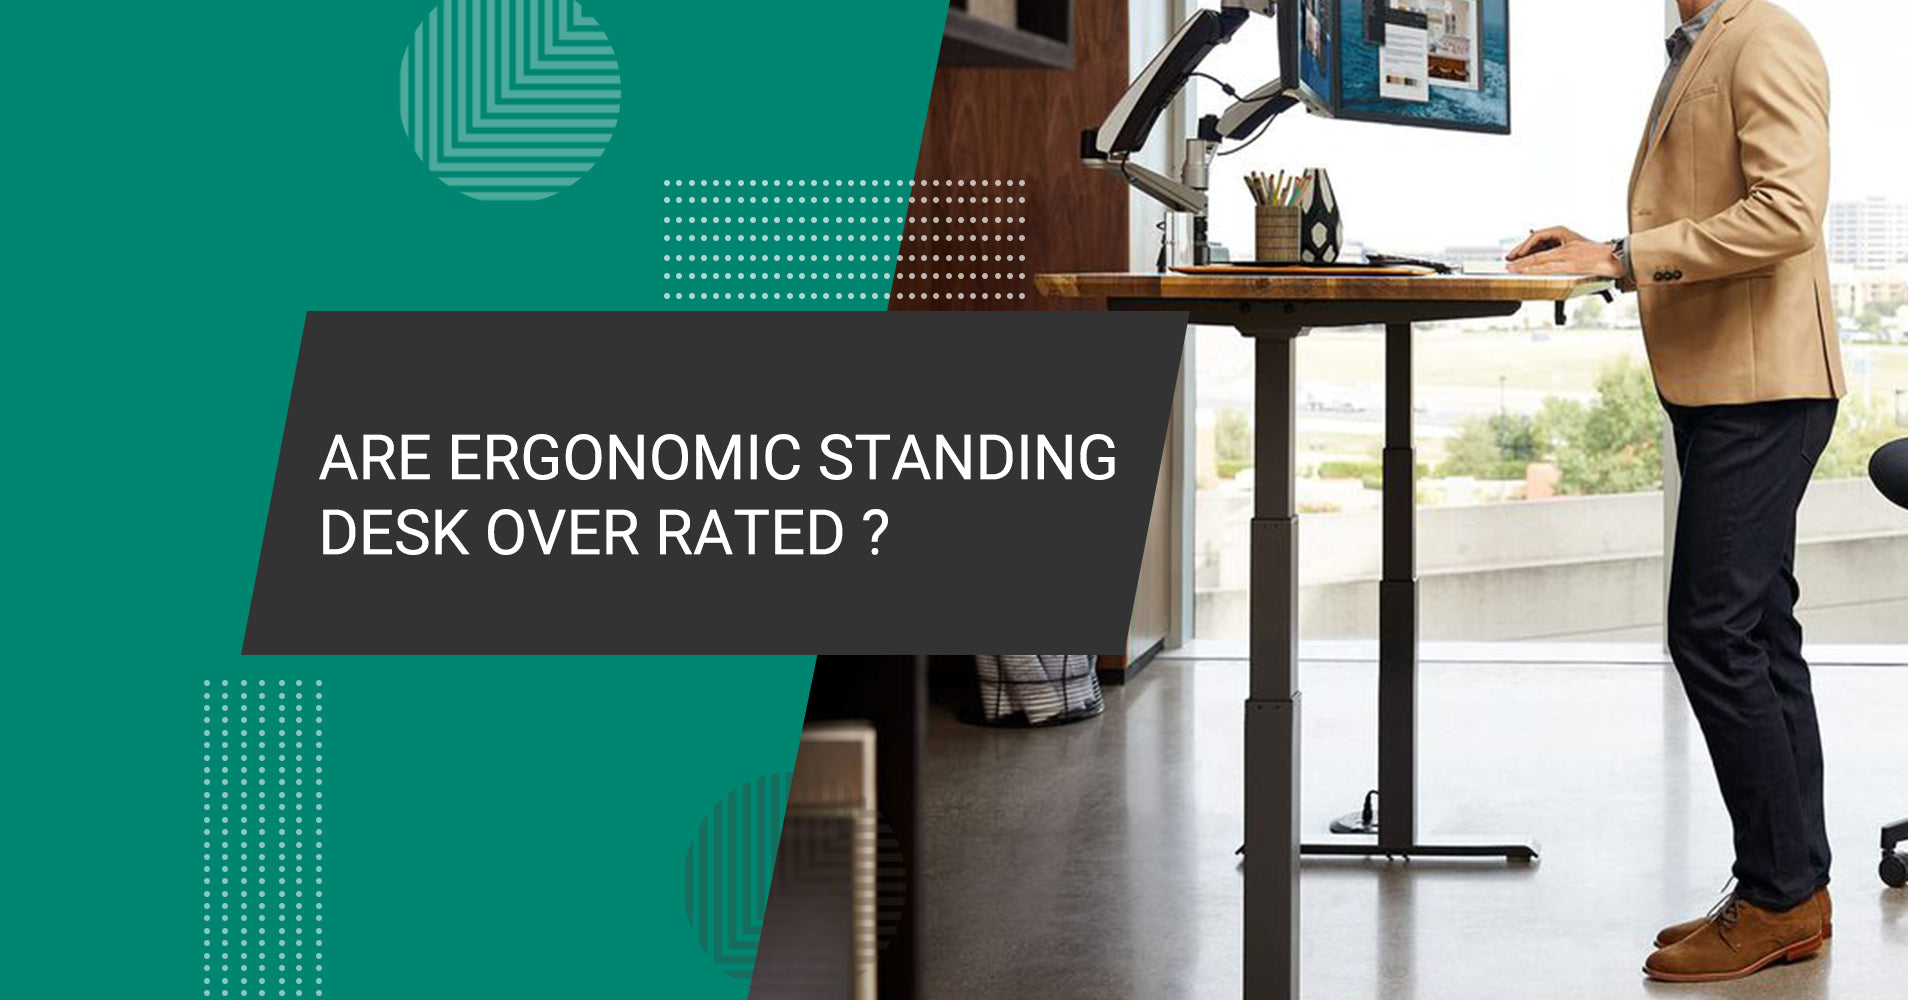 Are Ergonomic Standing Desk Over Rated